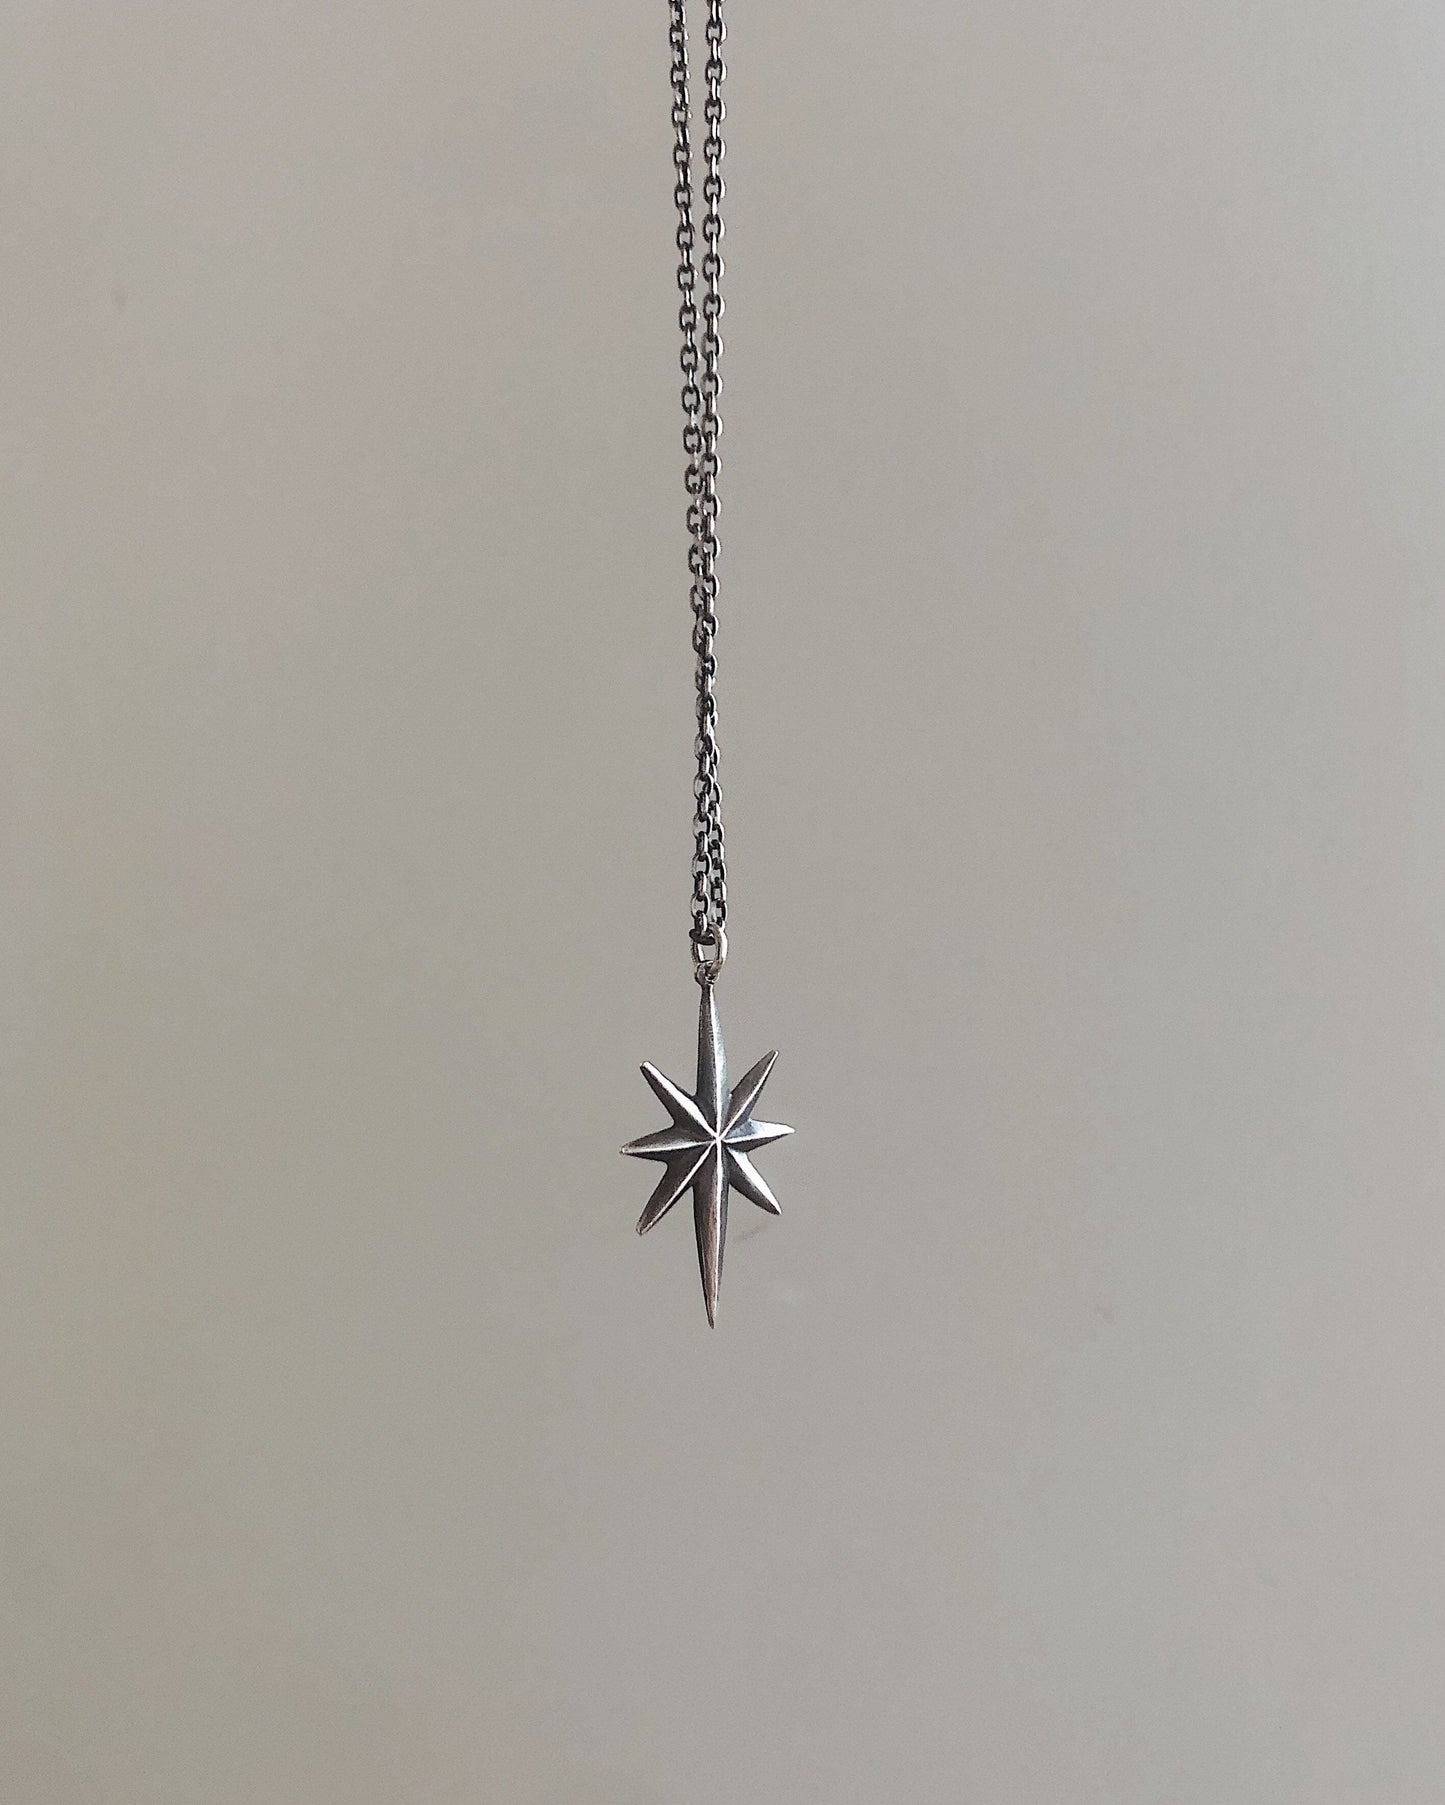 The North Star // Large // Necklace